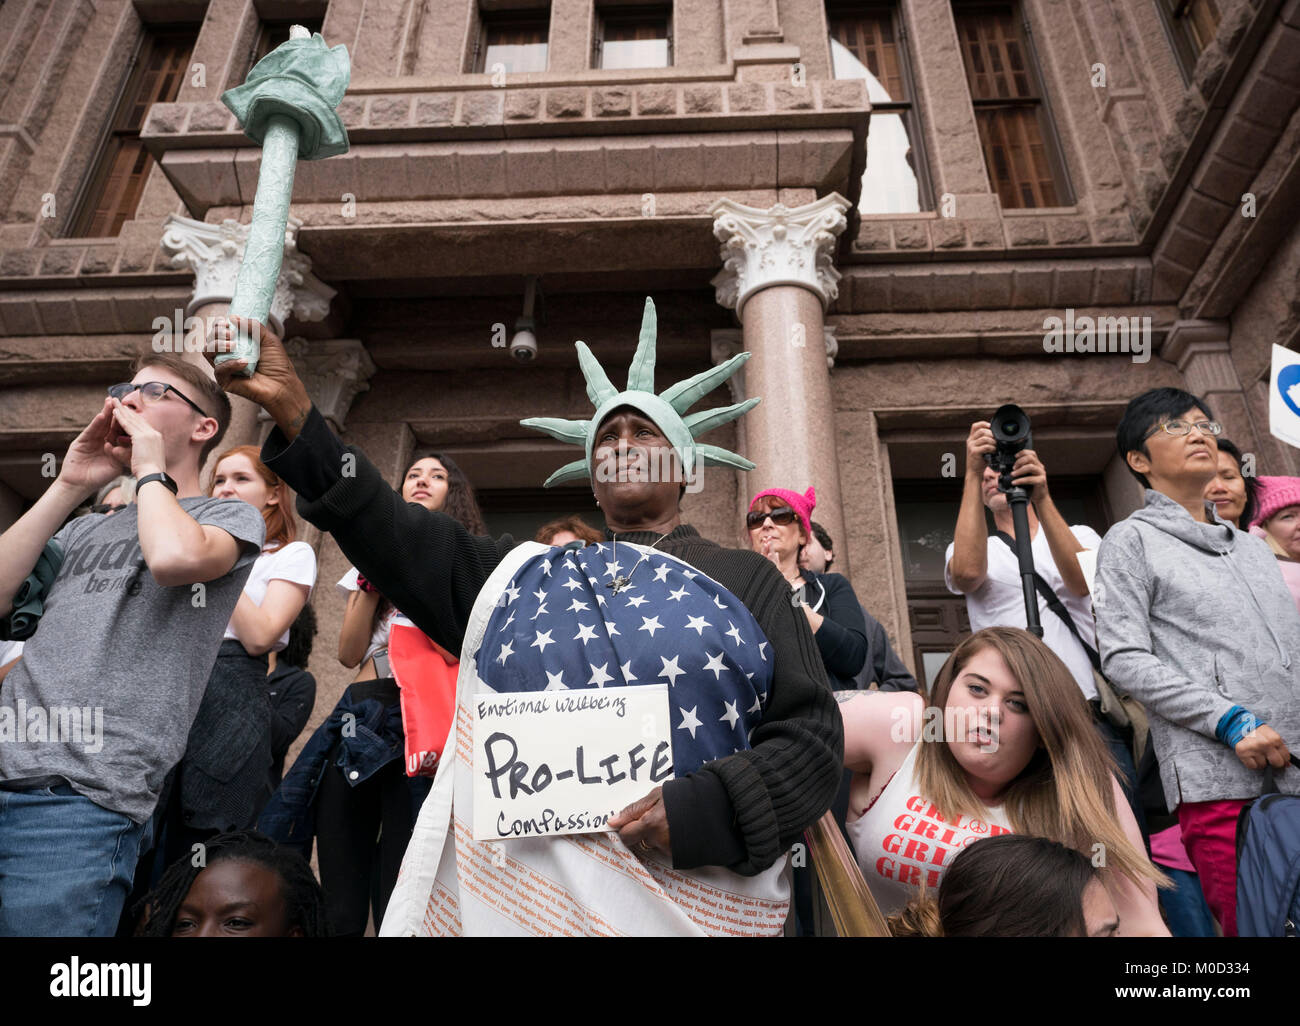 Peace Costanzo, a daily visitor to the Texas Capitol in her Statue of Liberty-like costume, stands on the Capitol steps surrounded by protesters  during a women's rights rally commemorating the anniversary of last year's Women's March on Washington and Pres. Donald Trump's controversial first year in office. Stock Photo